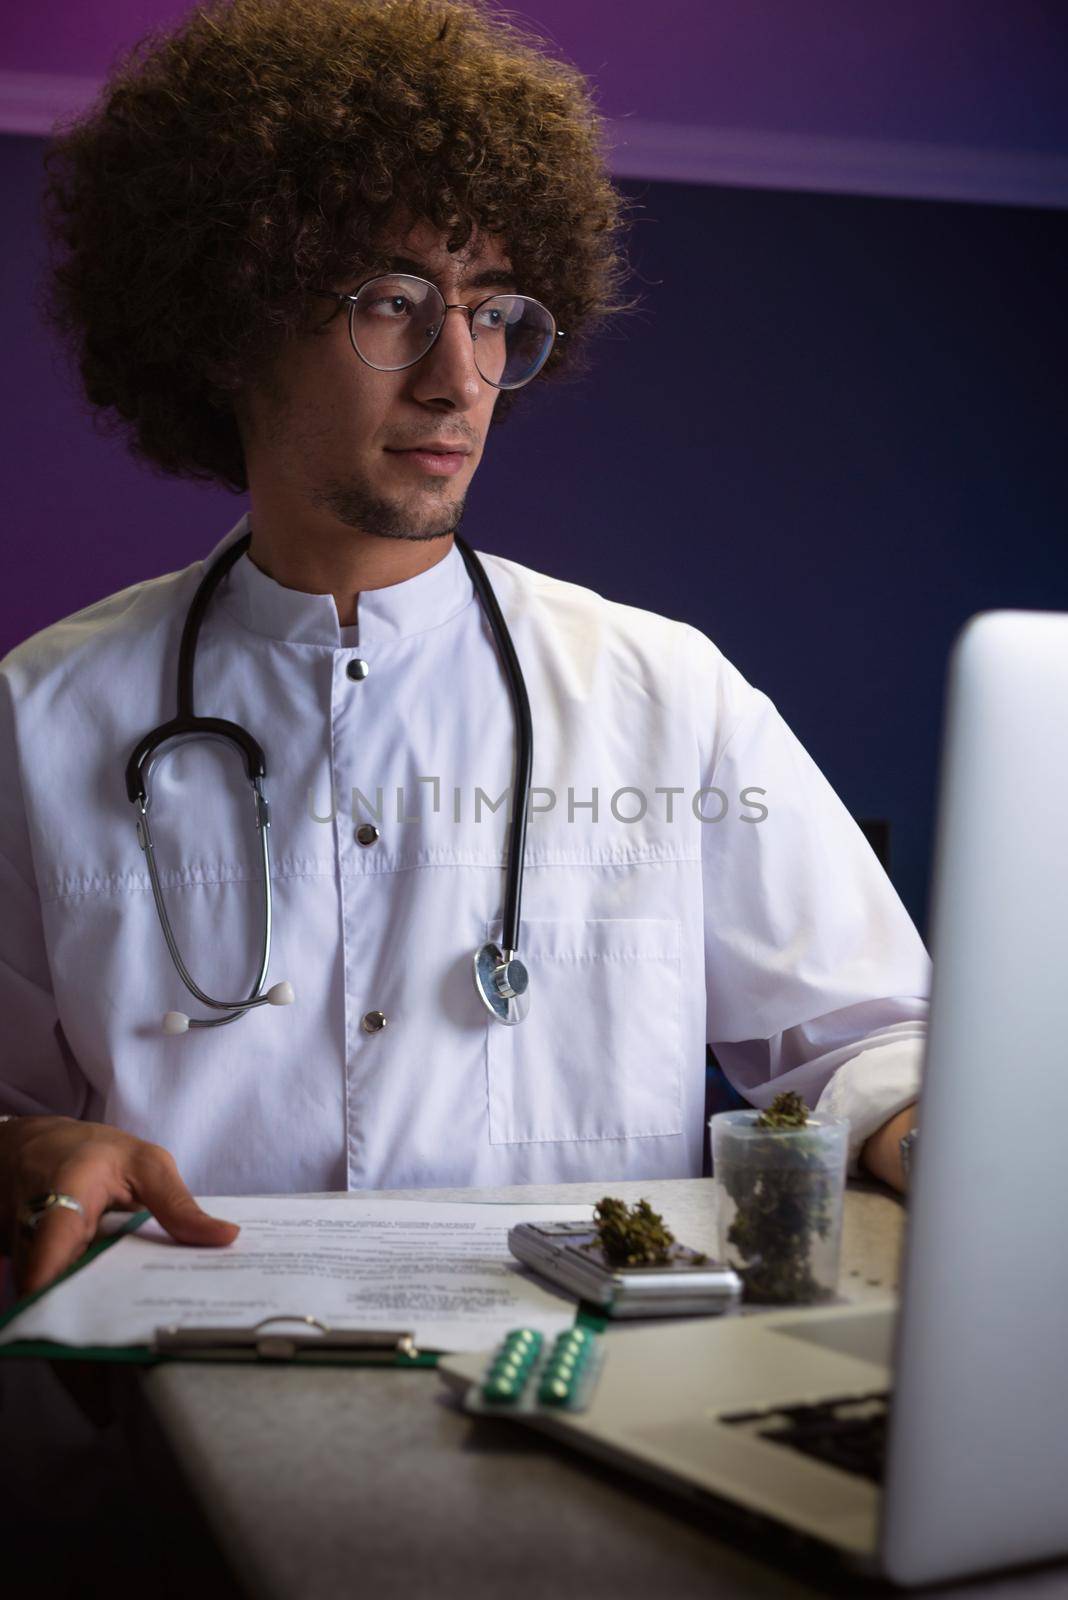 an Arab student with an Afro hairstyle in a doctor's suit is engaged in cannabis research